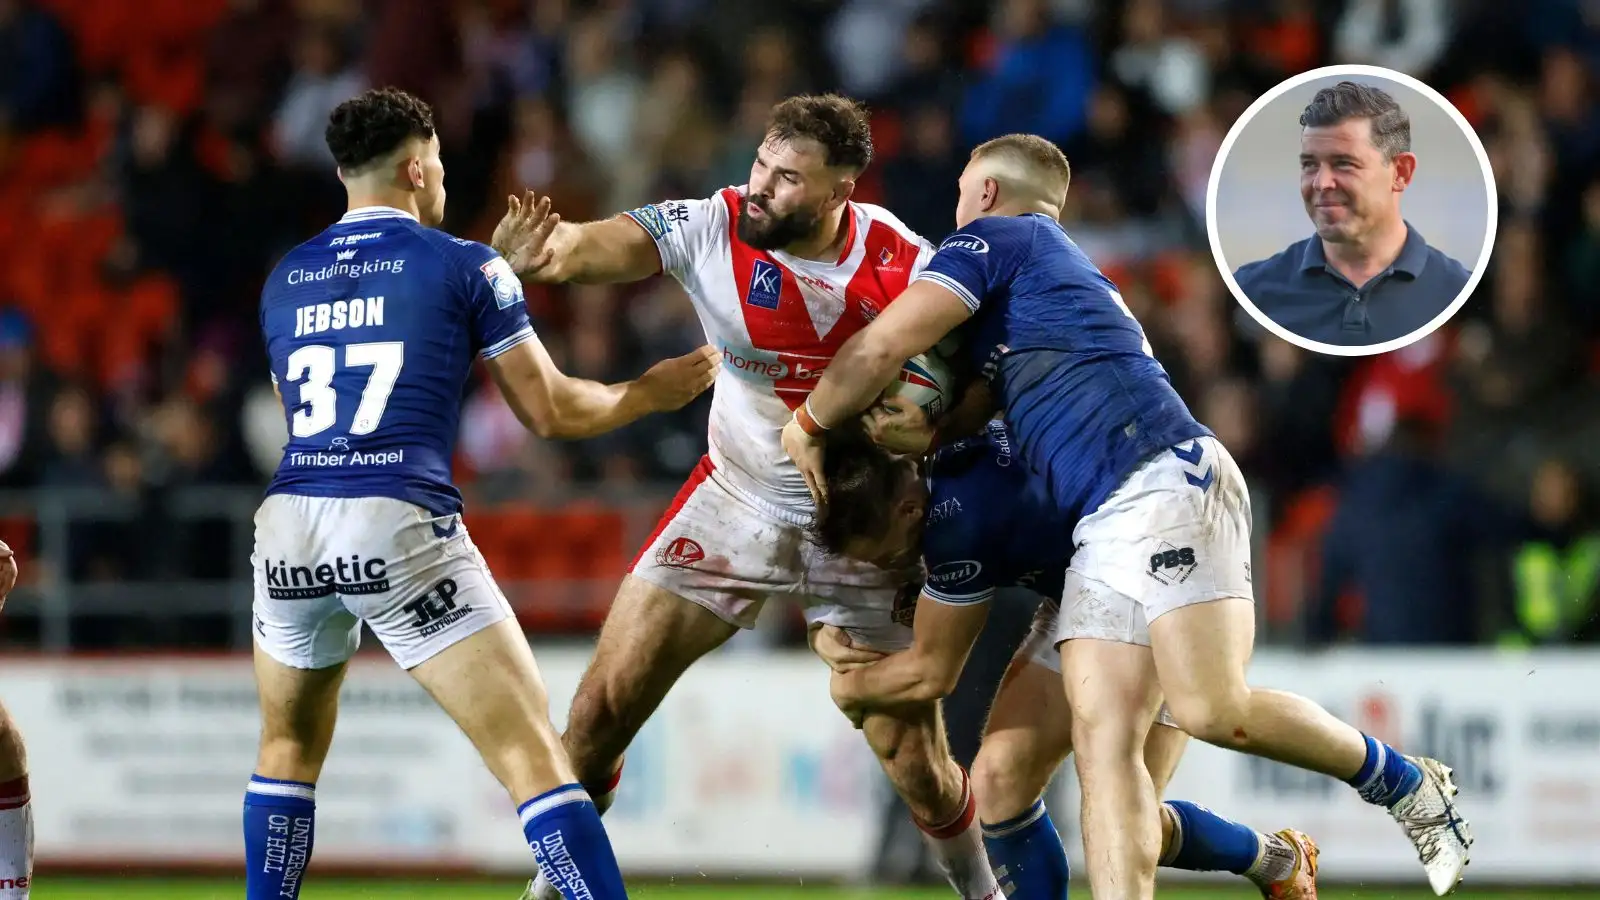 St Helens boss hails ‘remarkable’ Alex Walmsley as ‘influential’ forward makes stunning early return from injury